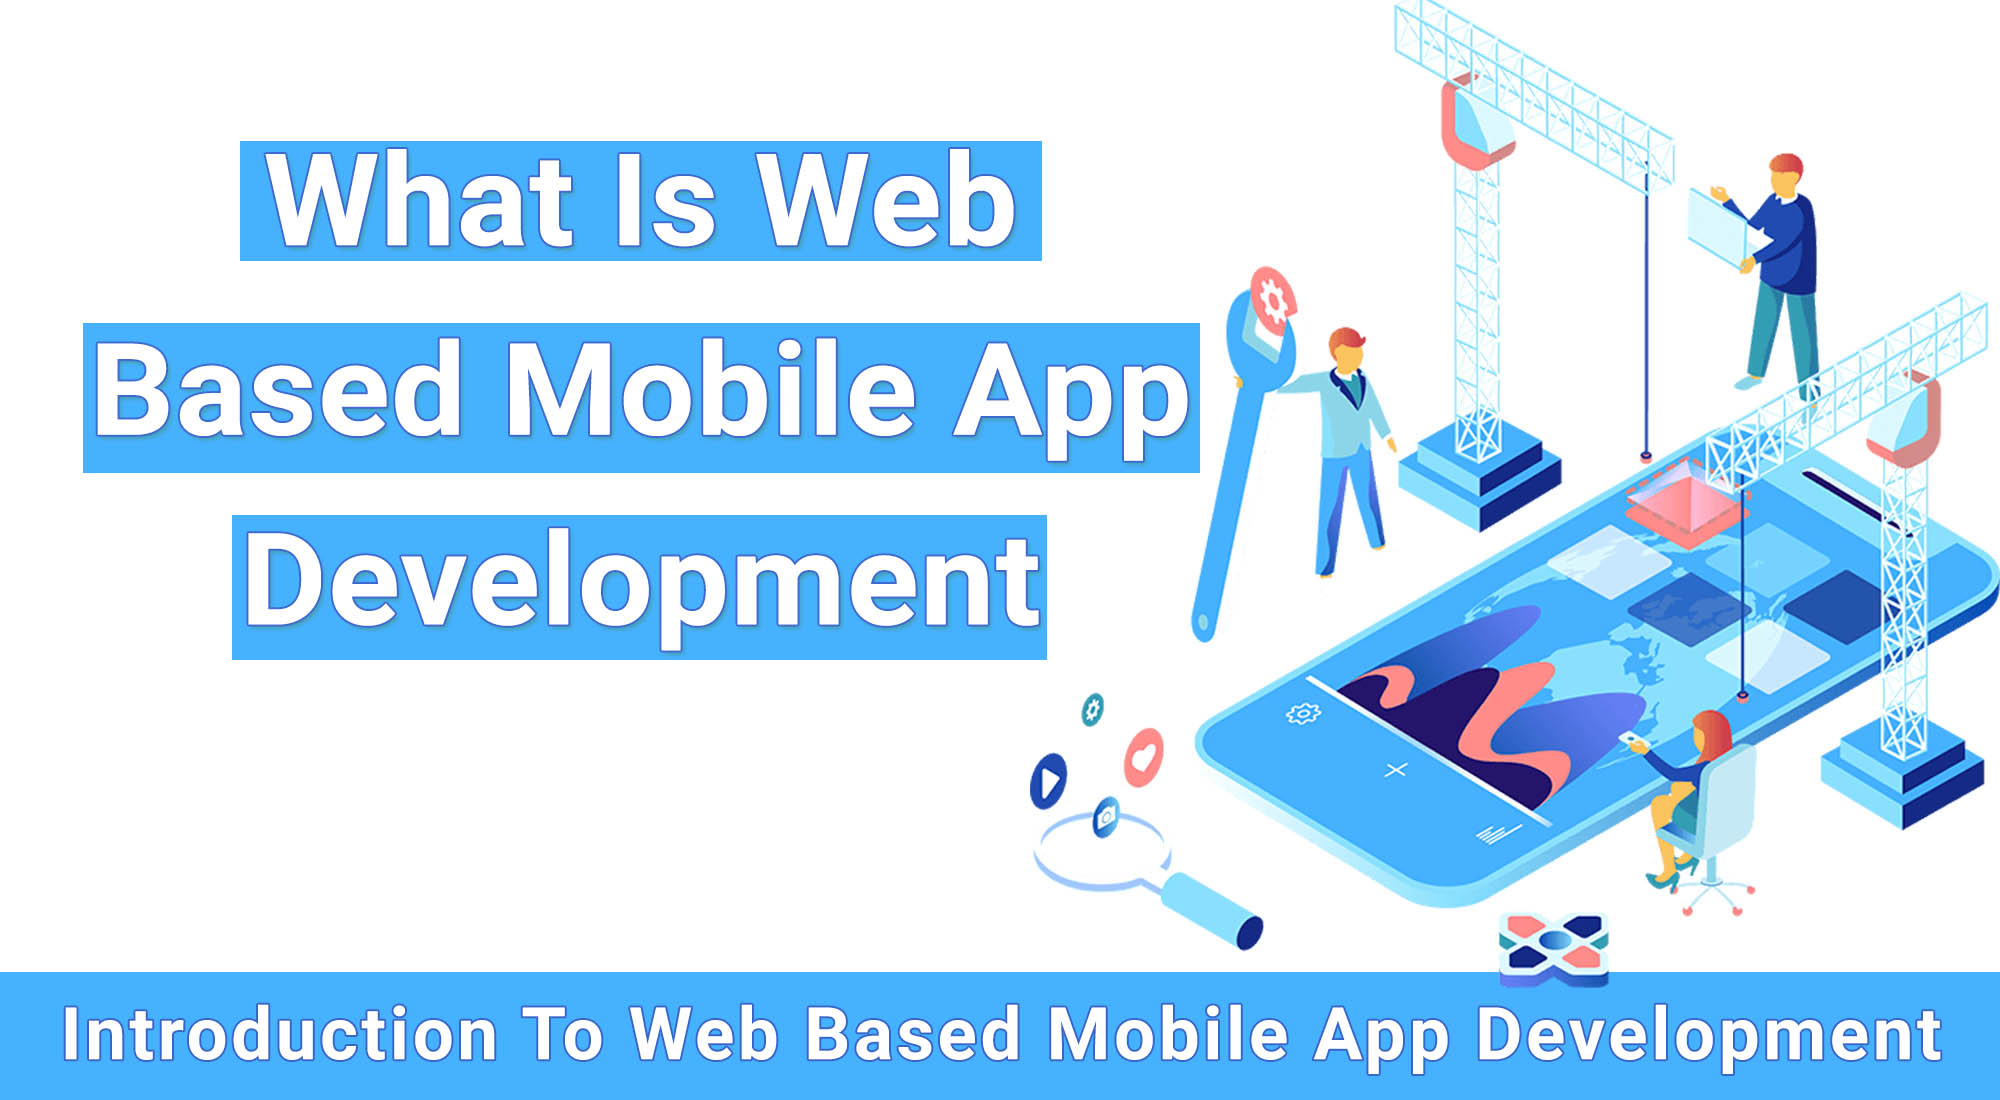 What is Web based mobile app development